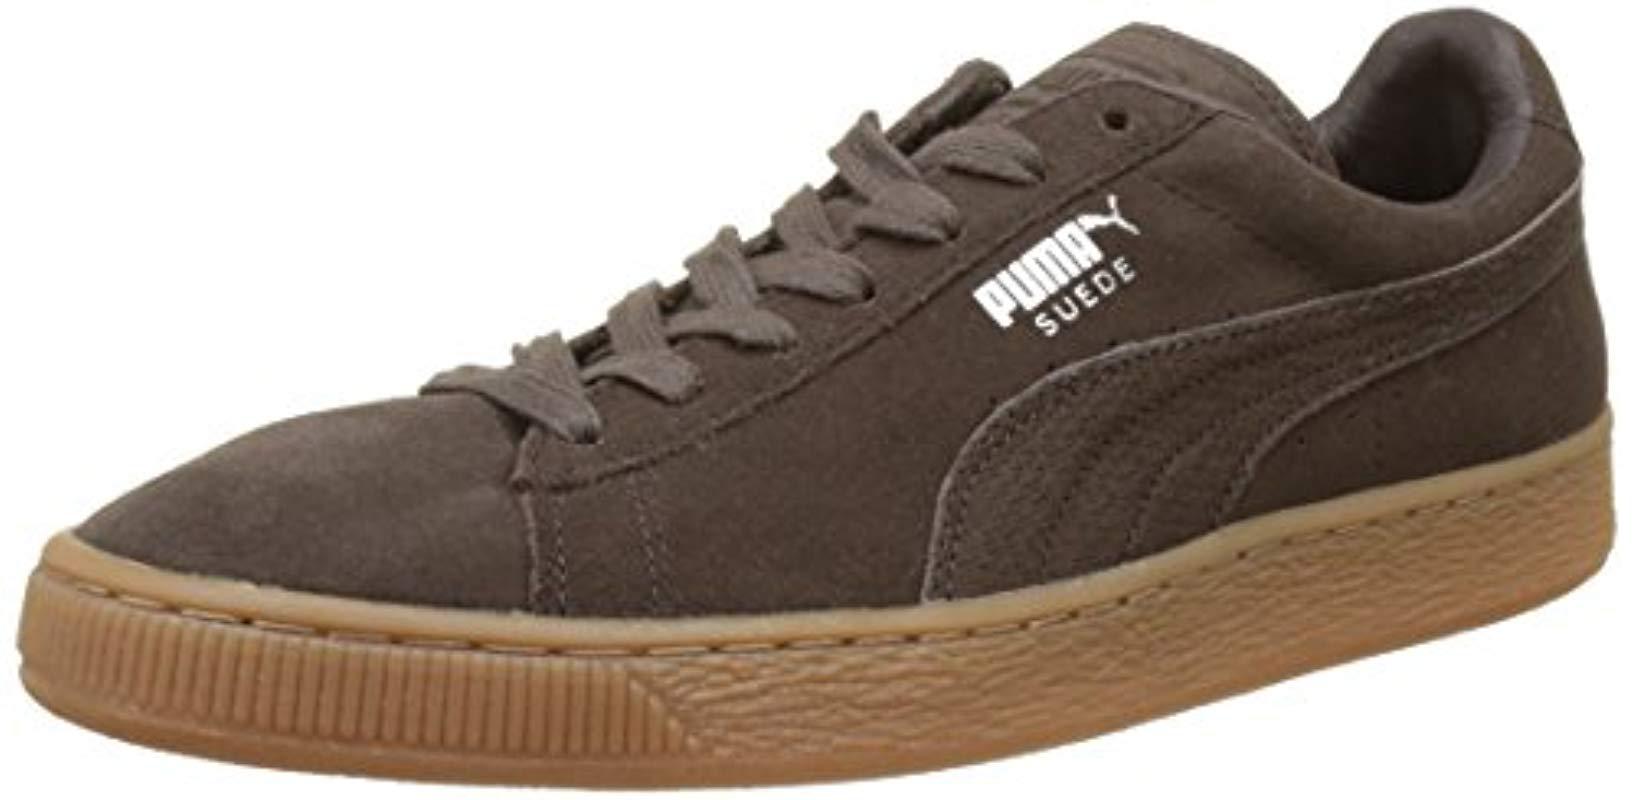 puma suede classic unisex adults low-top sneakers